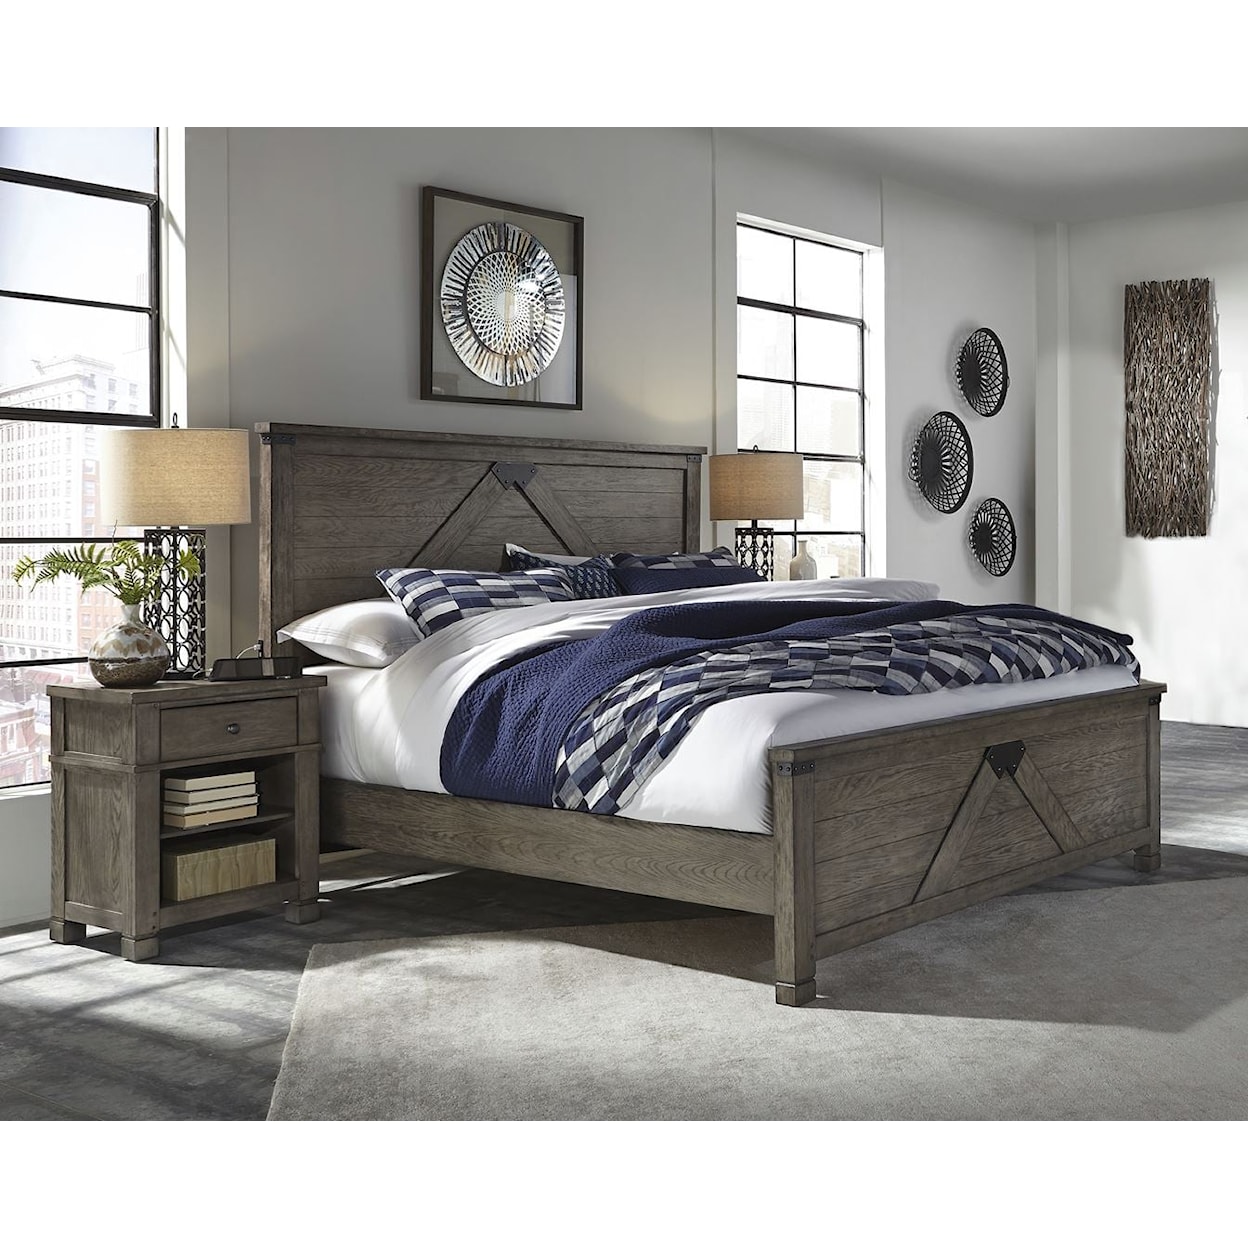 Aspenhome Tucker Queen Bed and Night stand Set